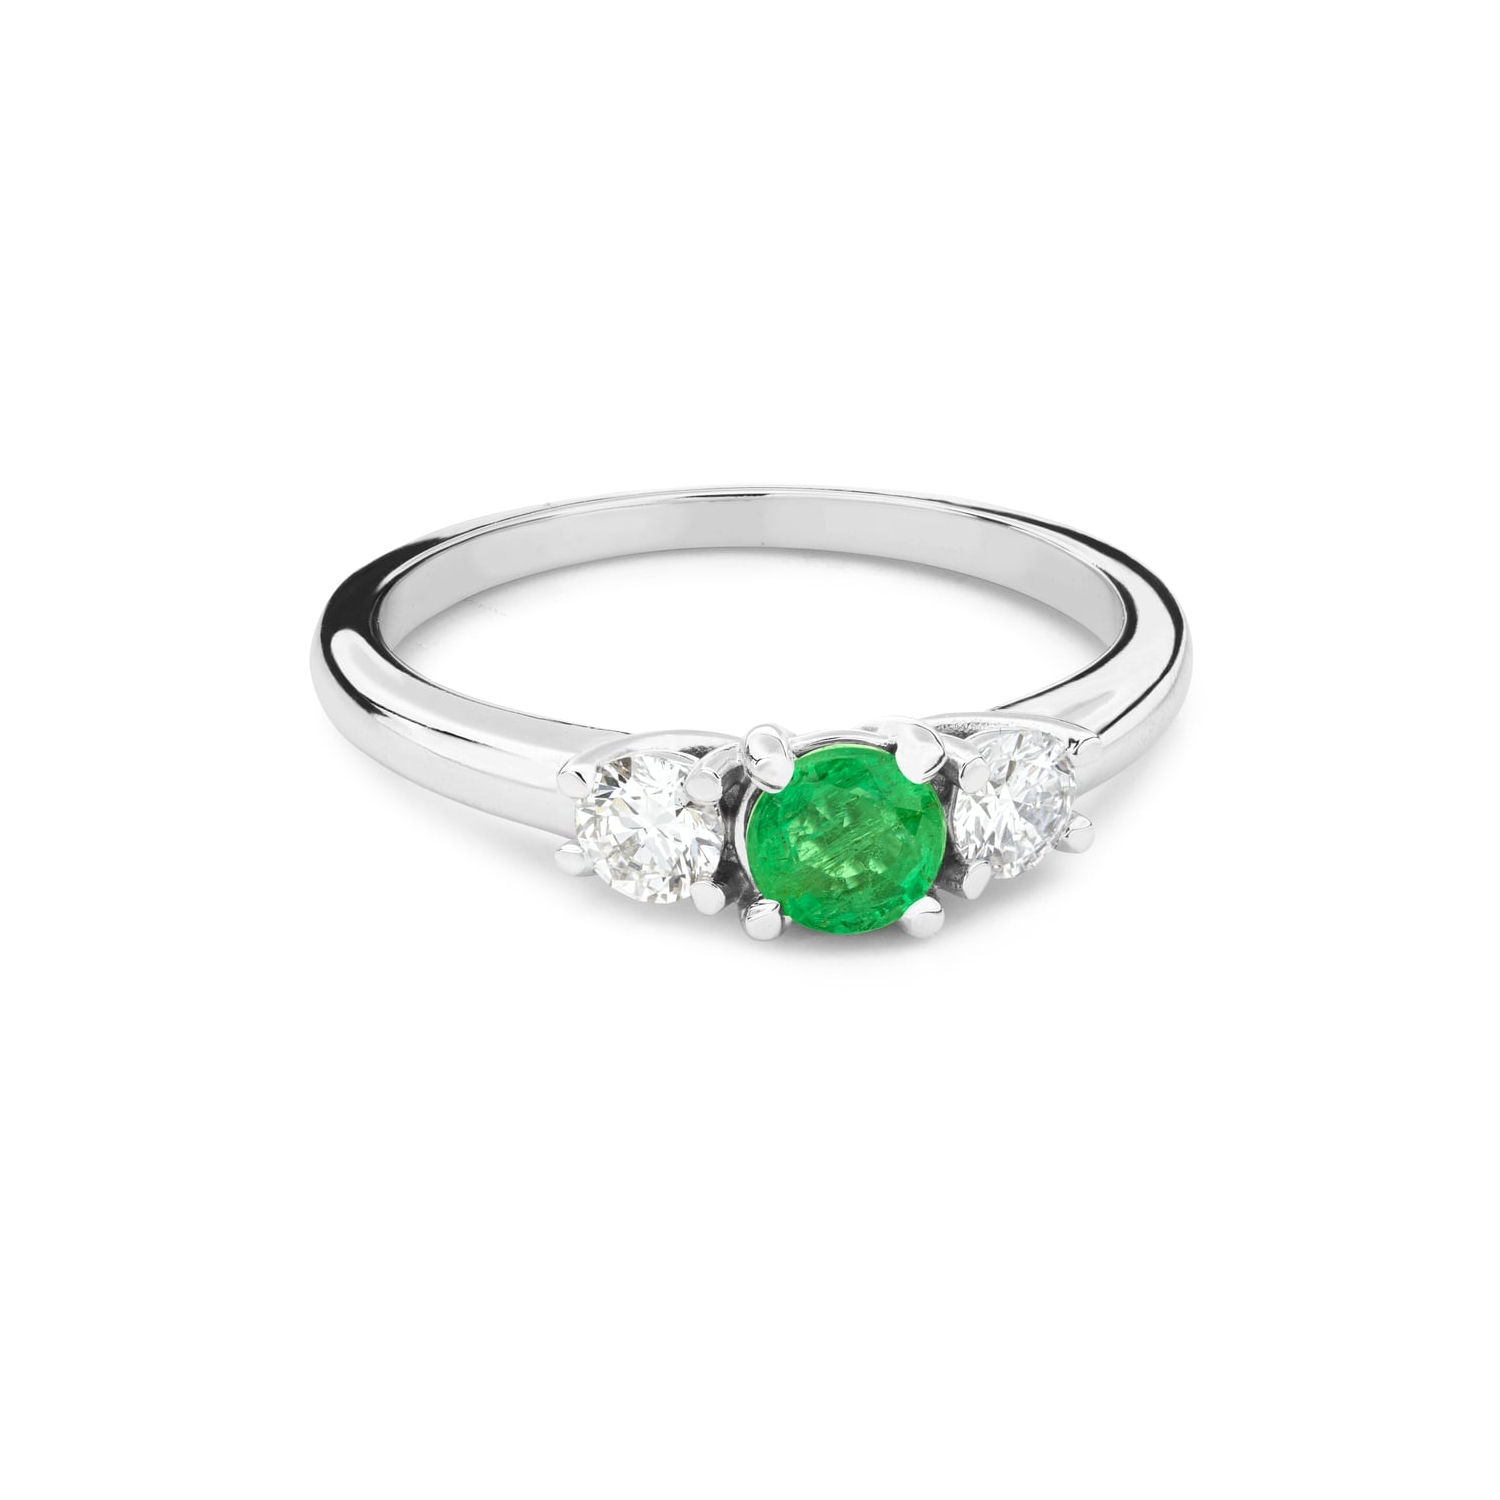 Engagement ring with gemstones "Trilogy 51"